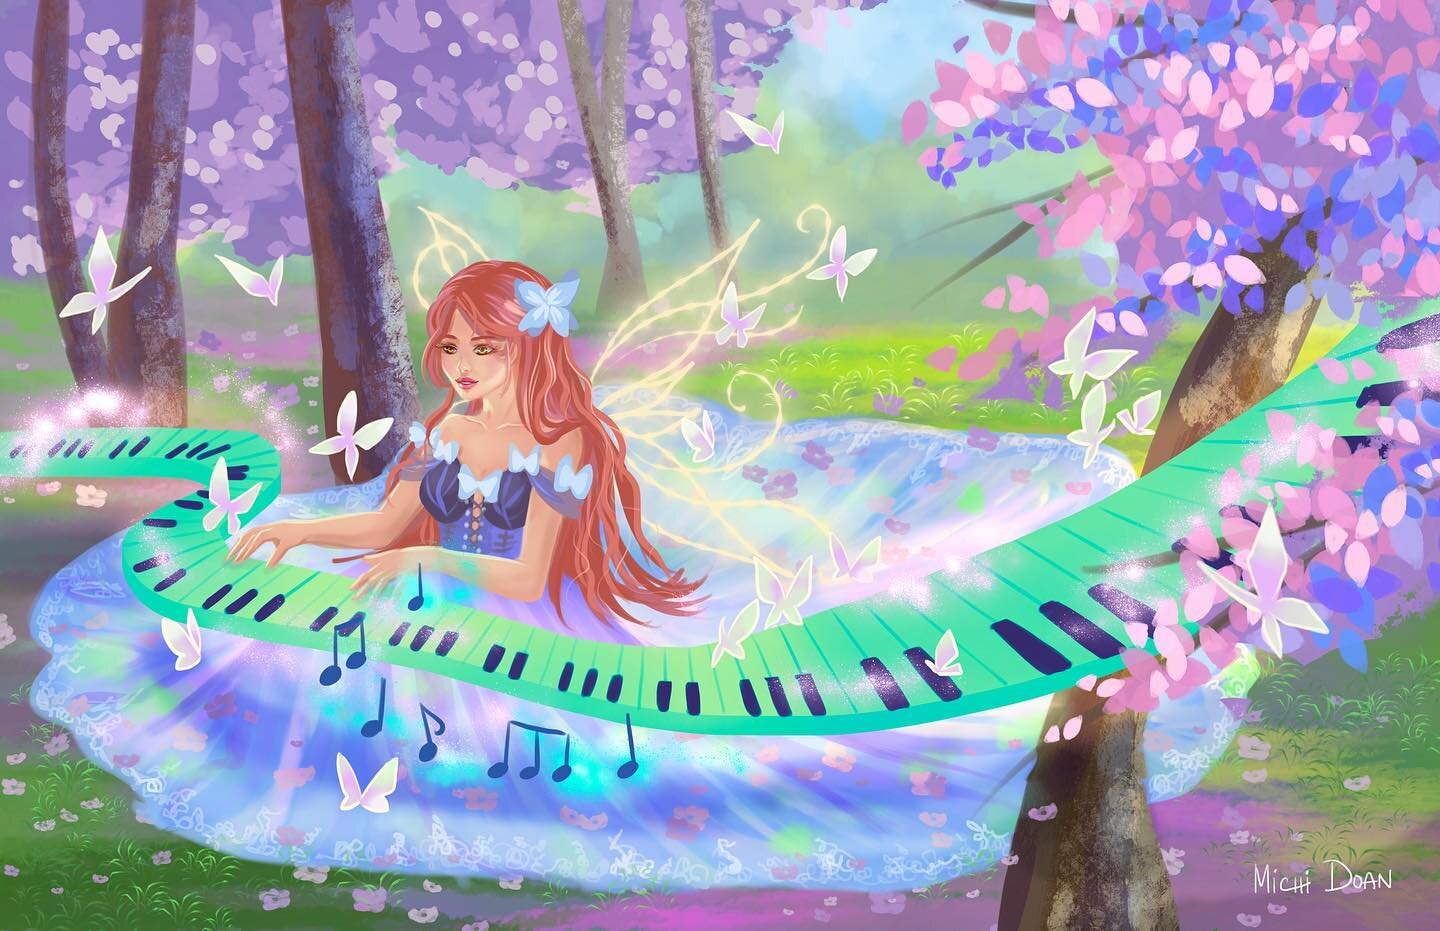 Illustration 36, Piano Forest. Do-Re-Mi-Fa-Sol, who is playing the magical piano? If you can play piano, what song would you like to play? 

#michidoan #michidoanart #piano #magicalart